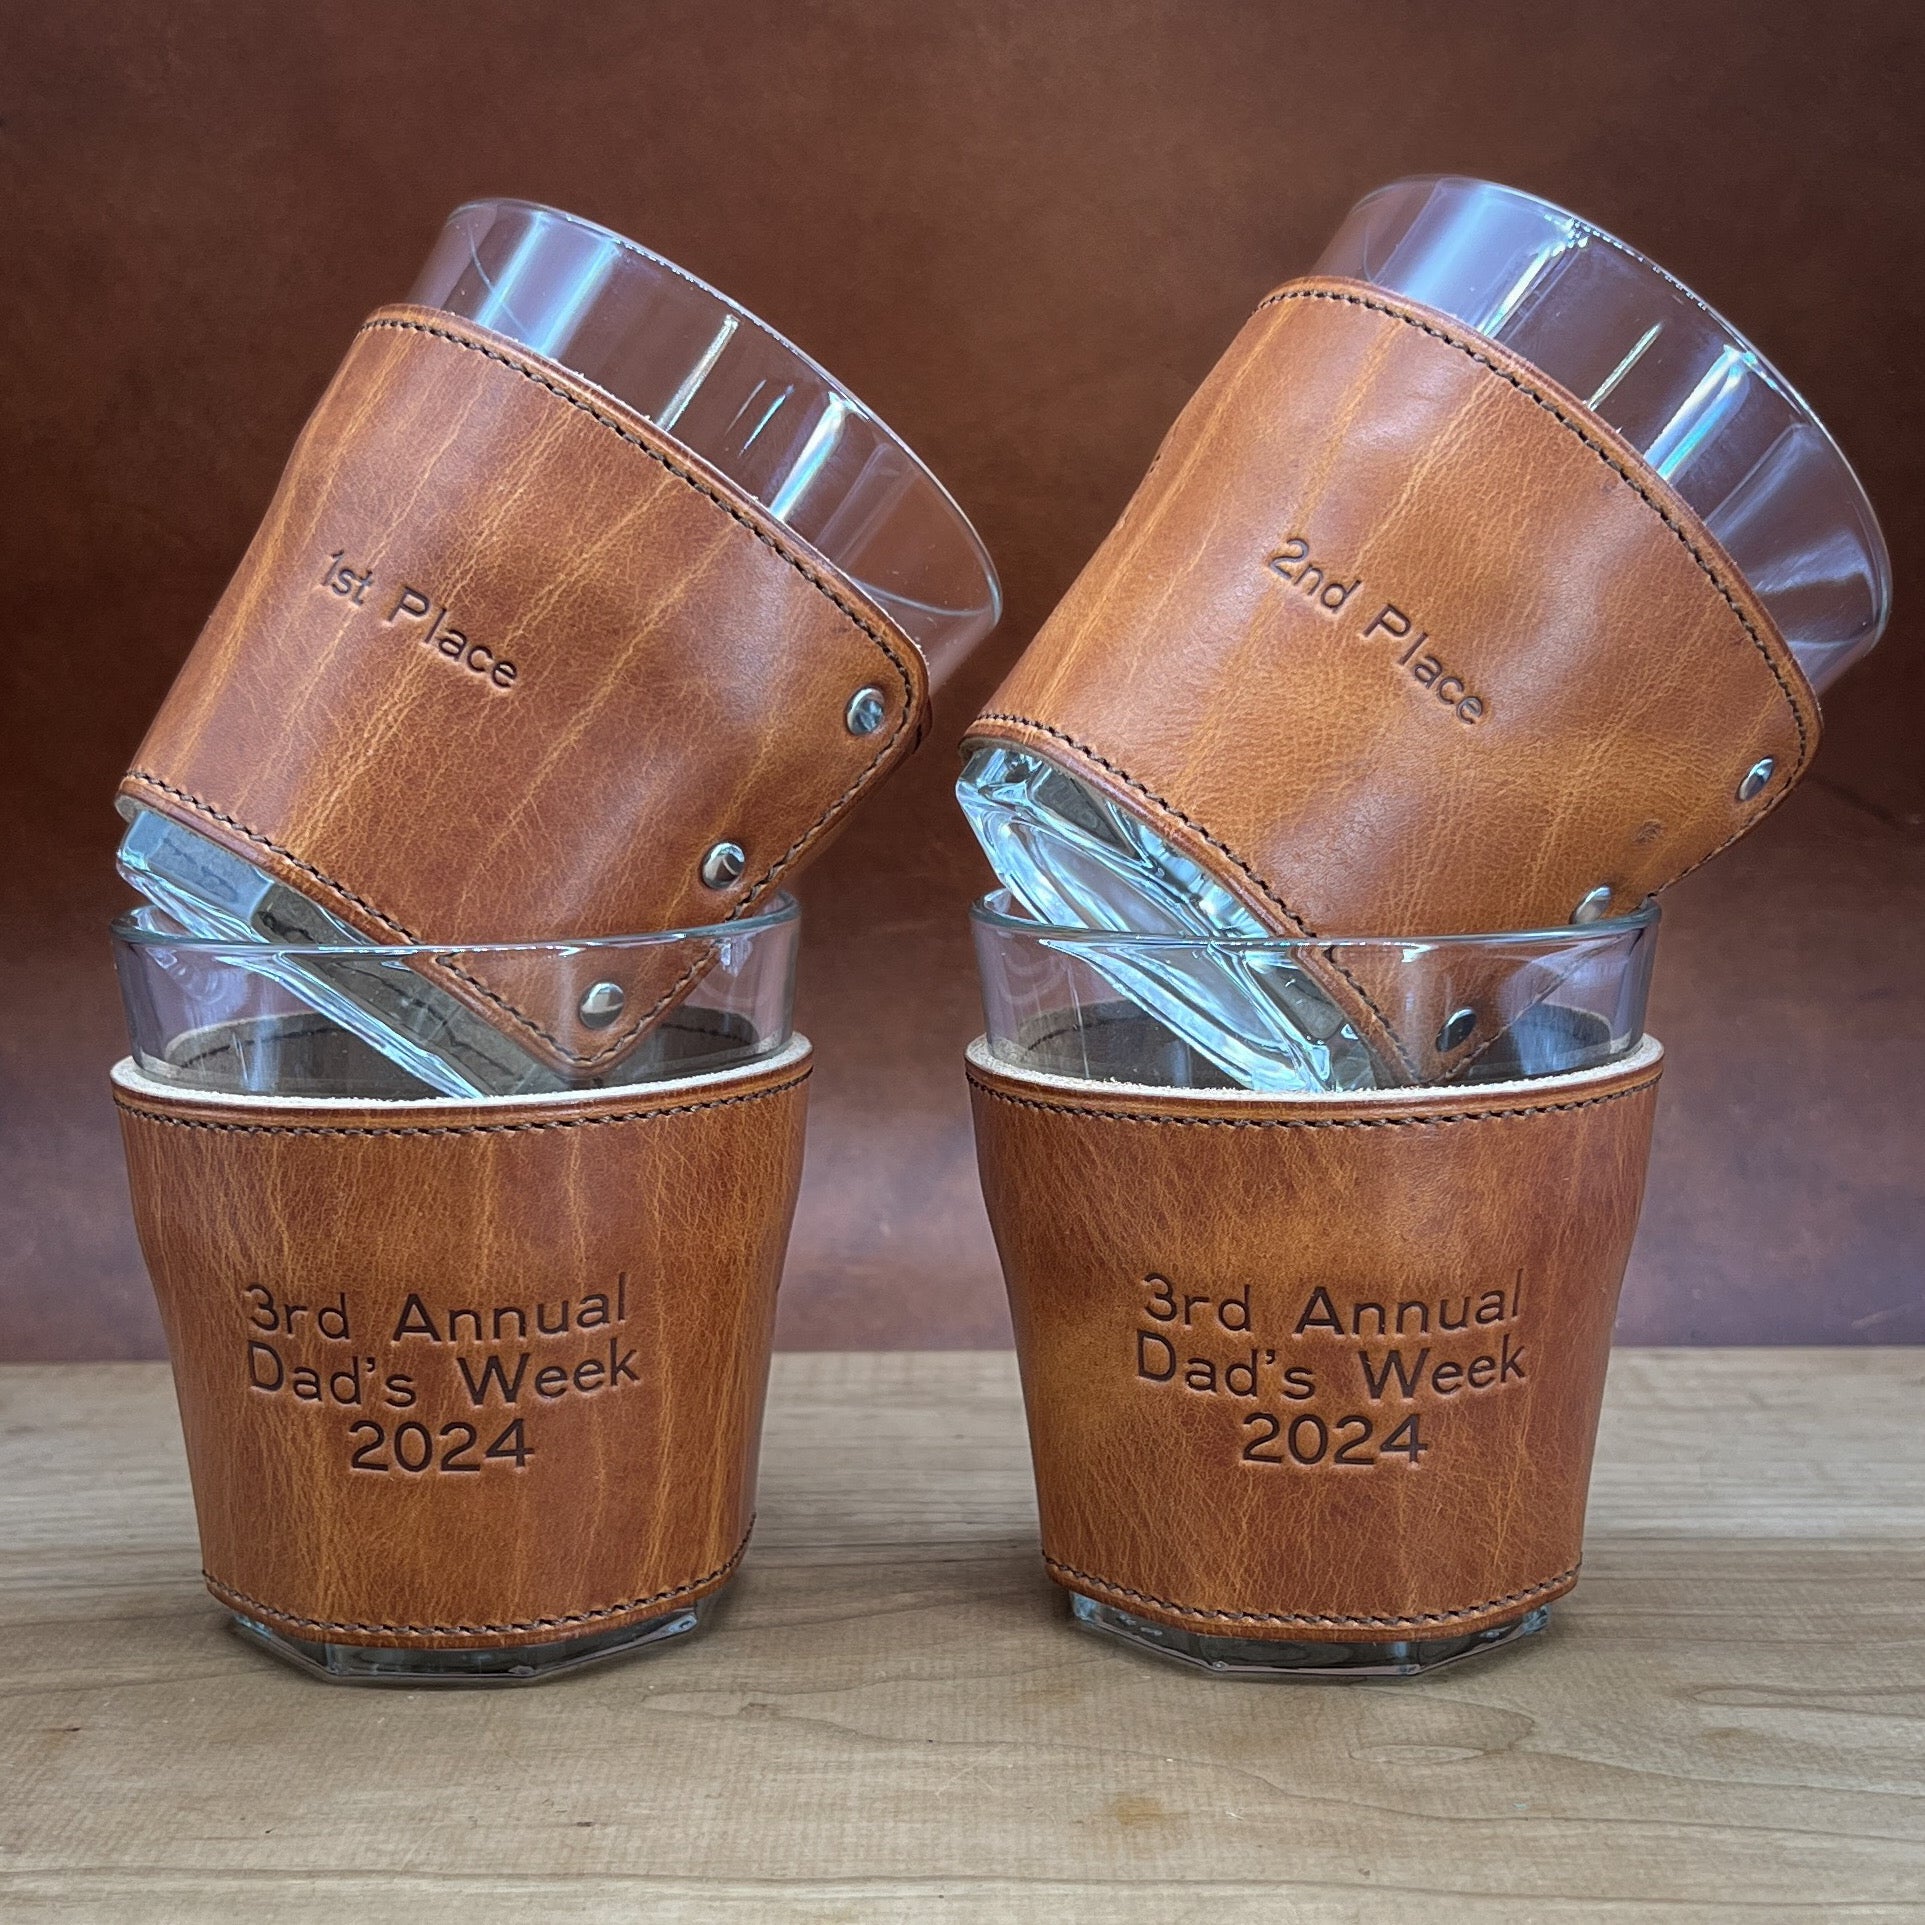 Custom Whiskey Glasses Celebrating A Dad’s Weekend Golf Tournament.